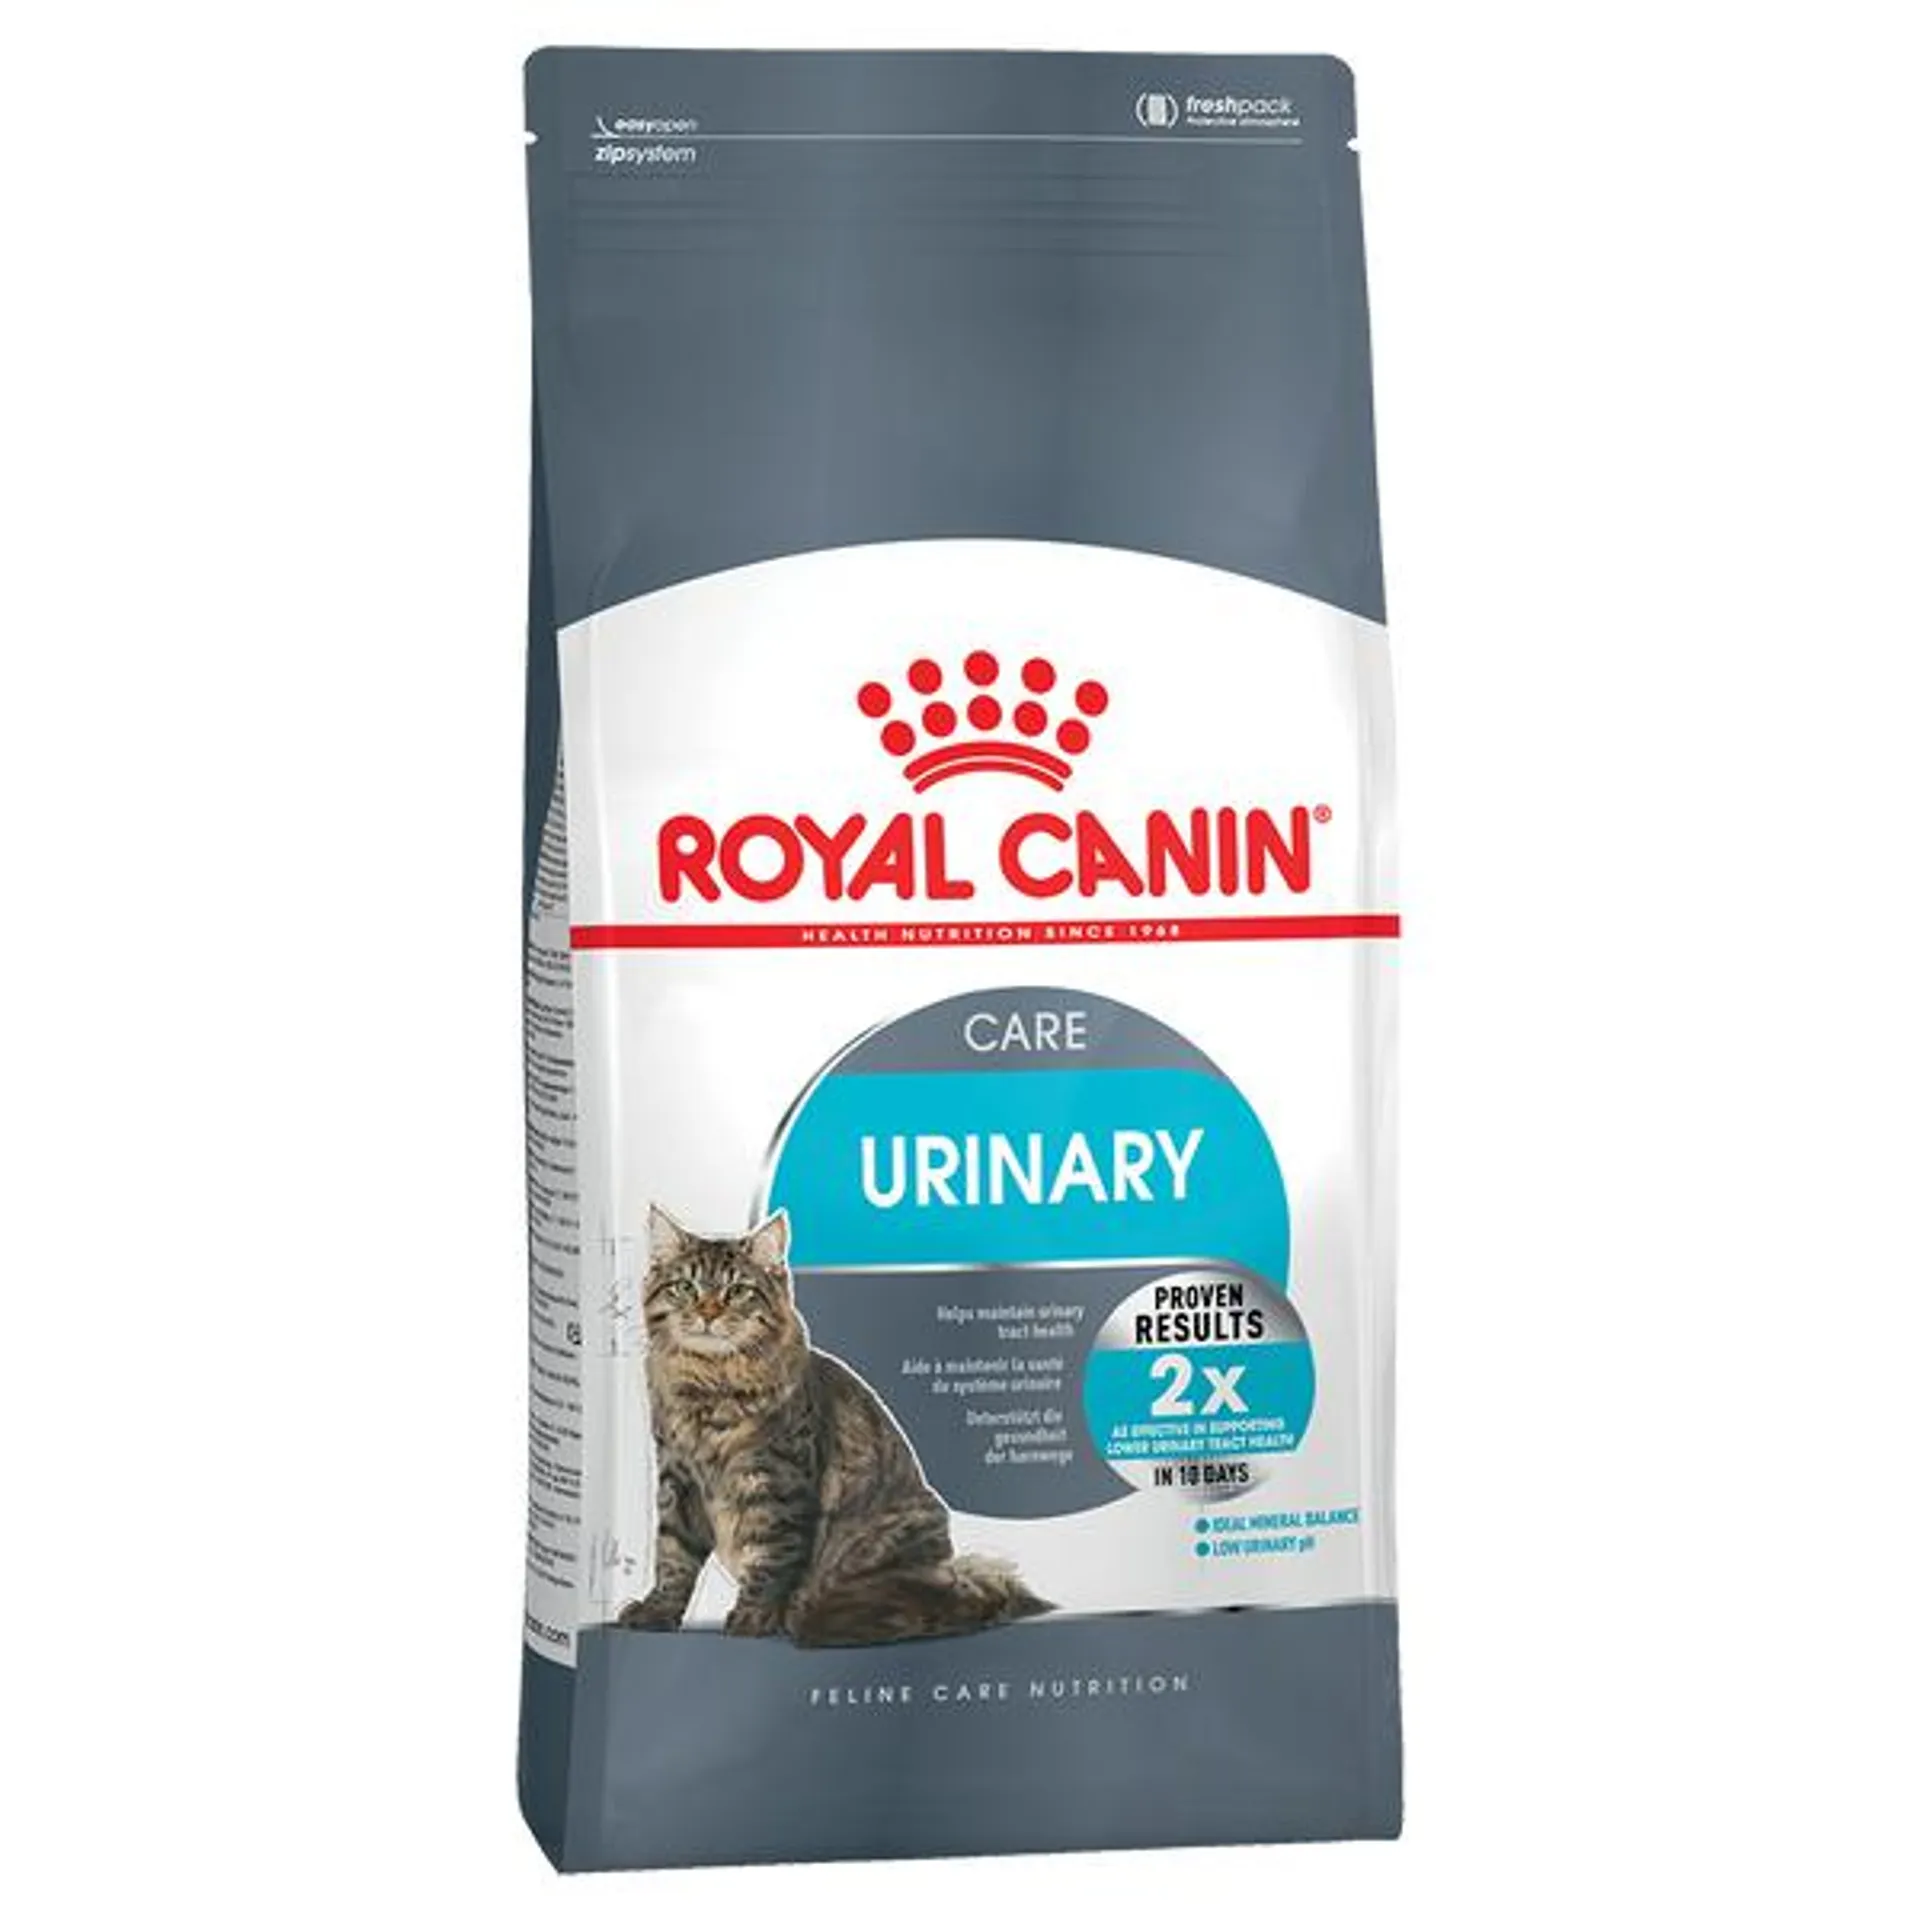 Royal Canin - Urinary Care Adult Cat Dry Food (4kg)